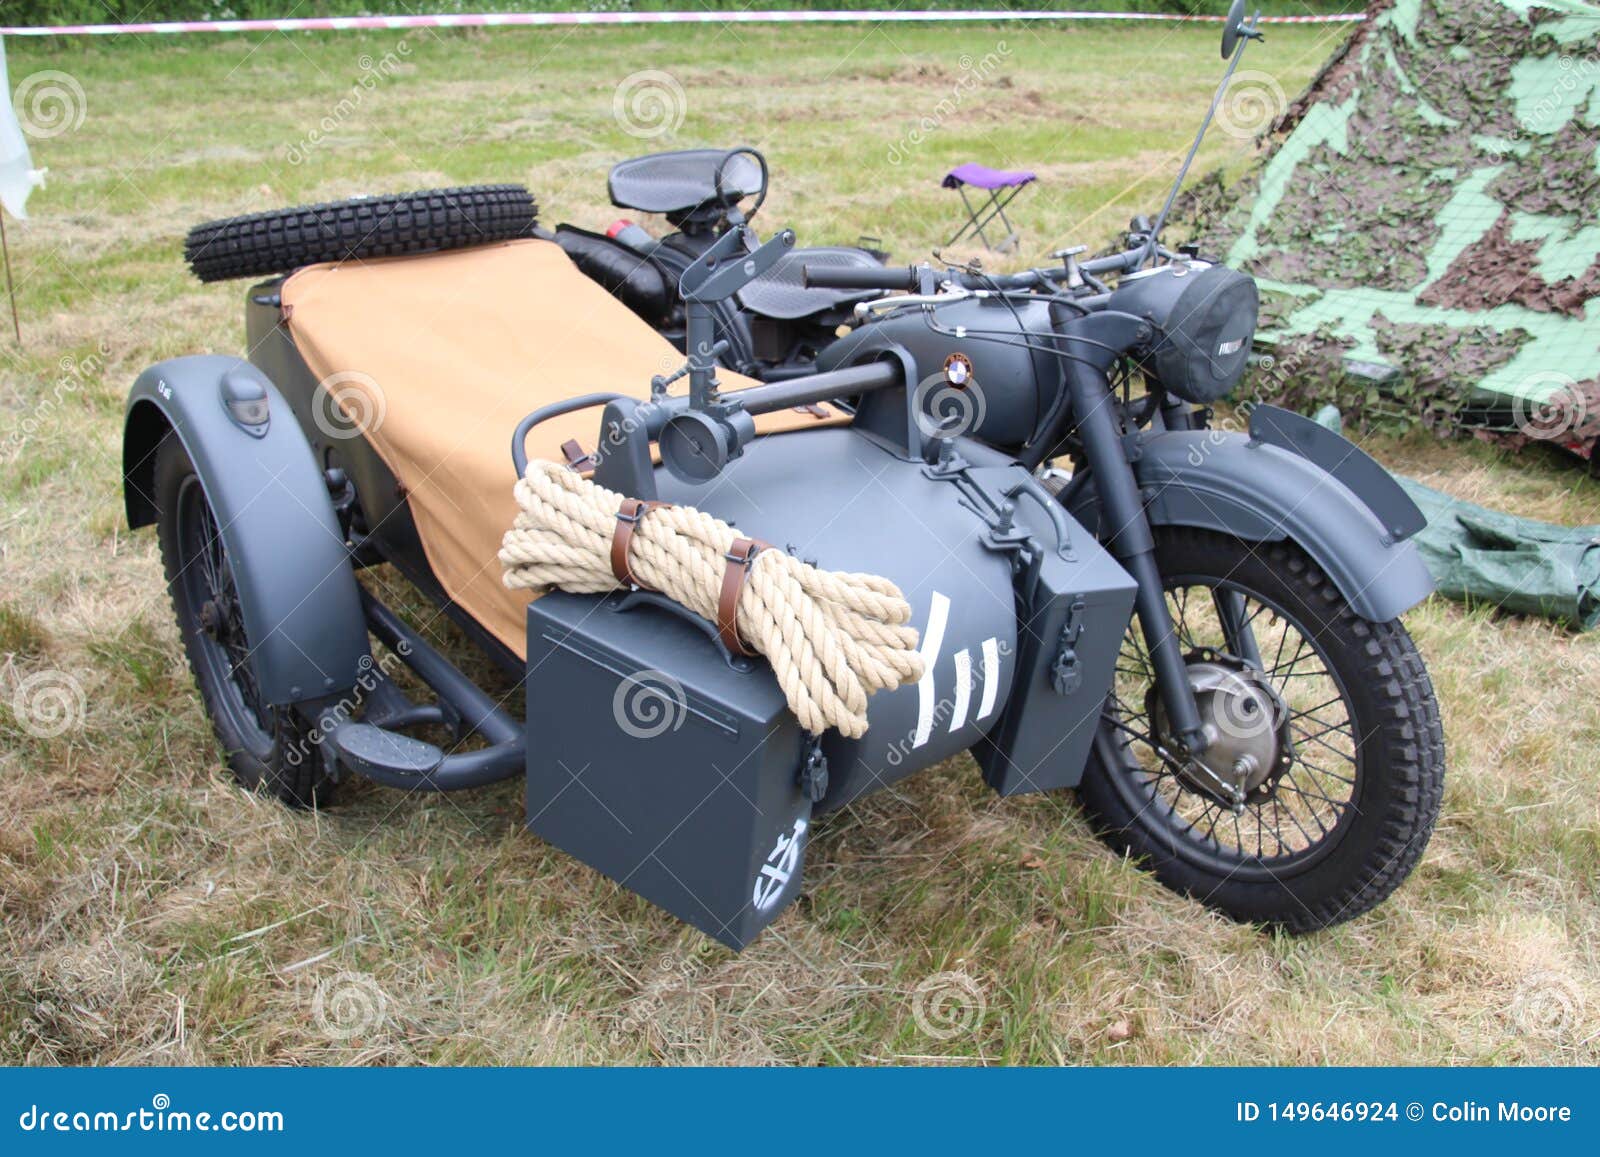 German Motorcycle and Sidecar Editorial Stock Image - Image of classic